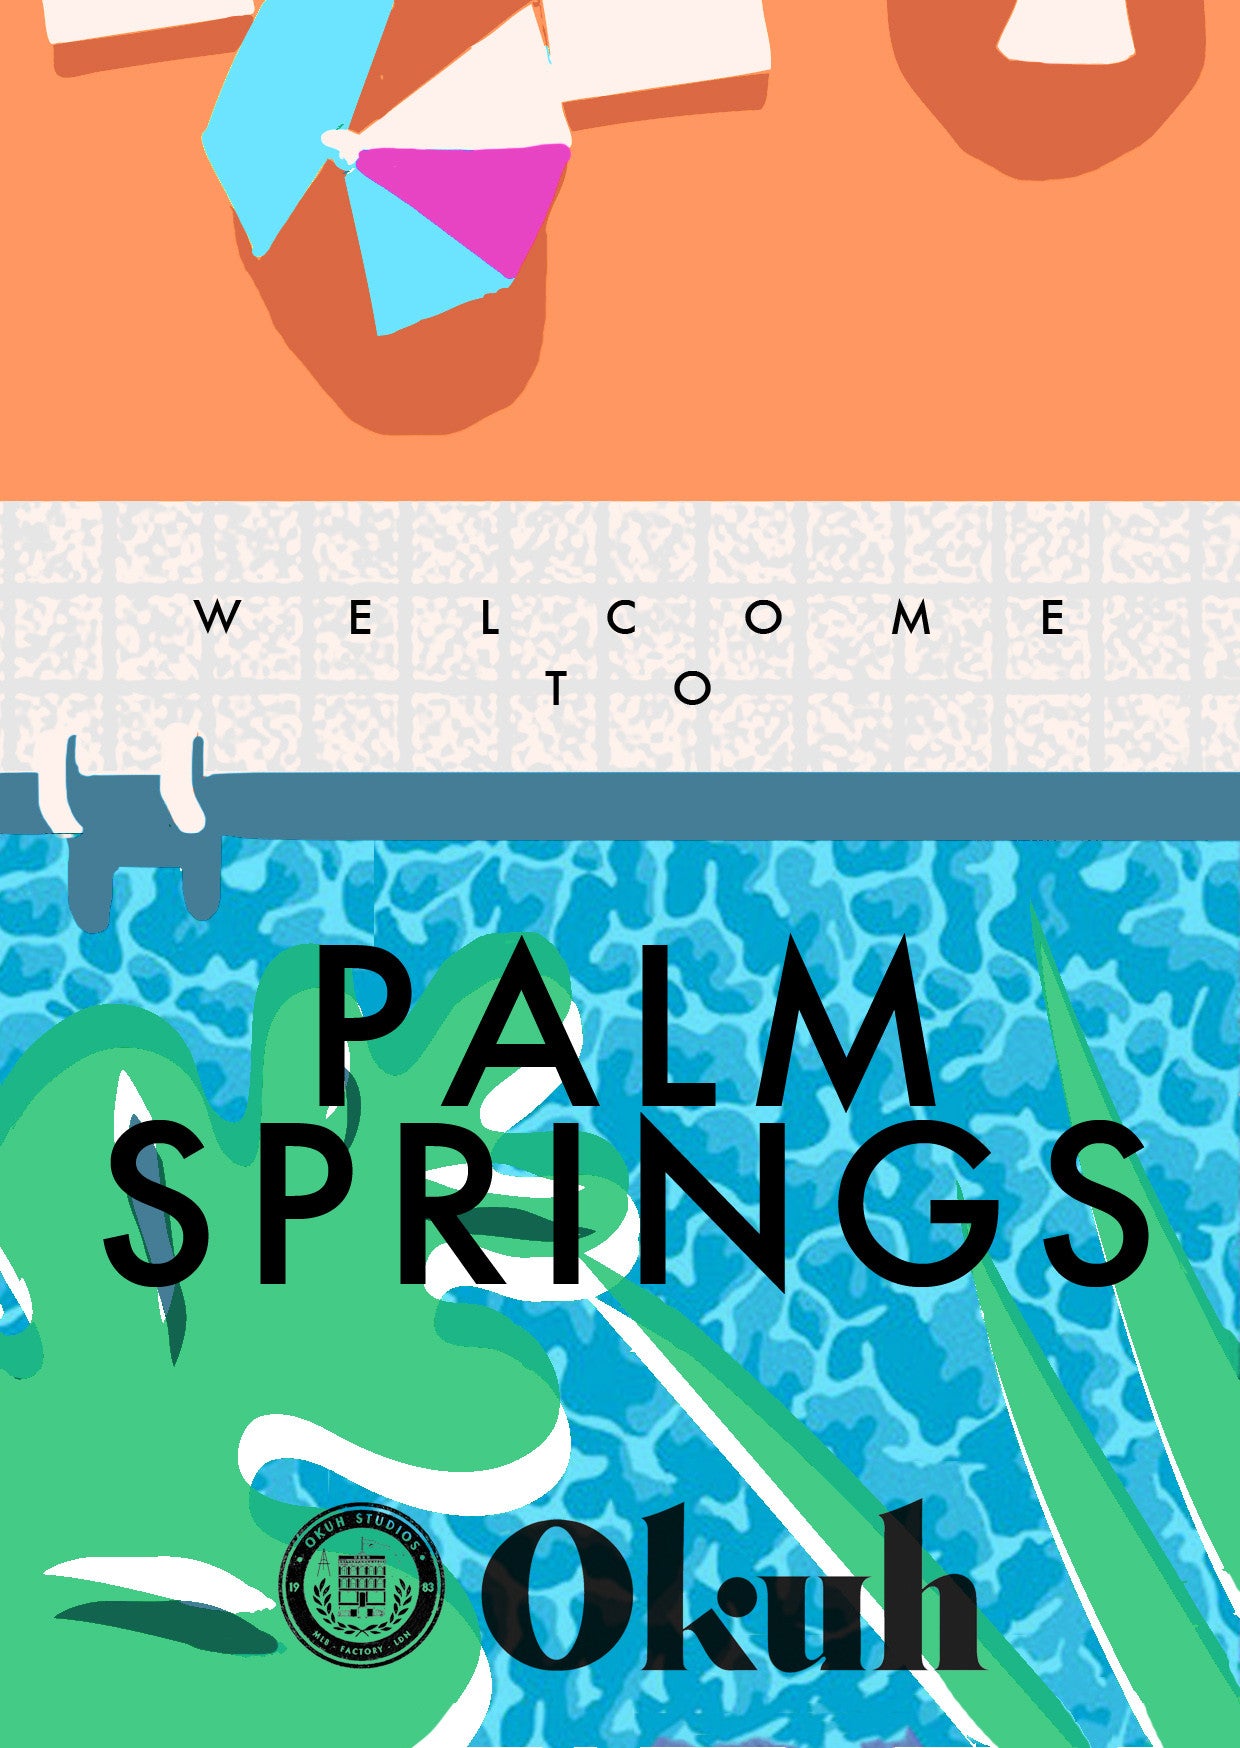 Palm Springs, Famous hangouts, Hipster pools & Art